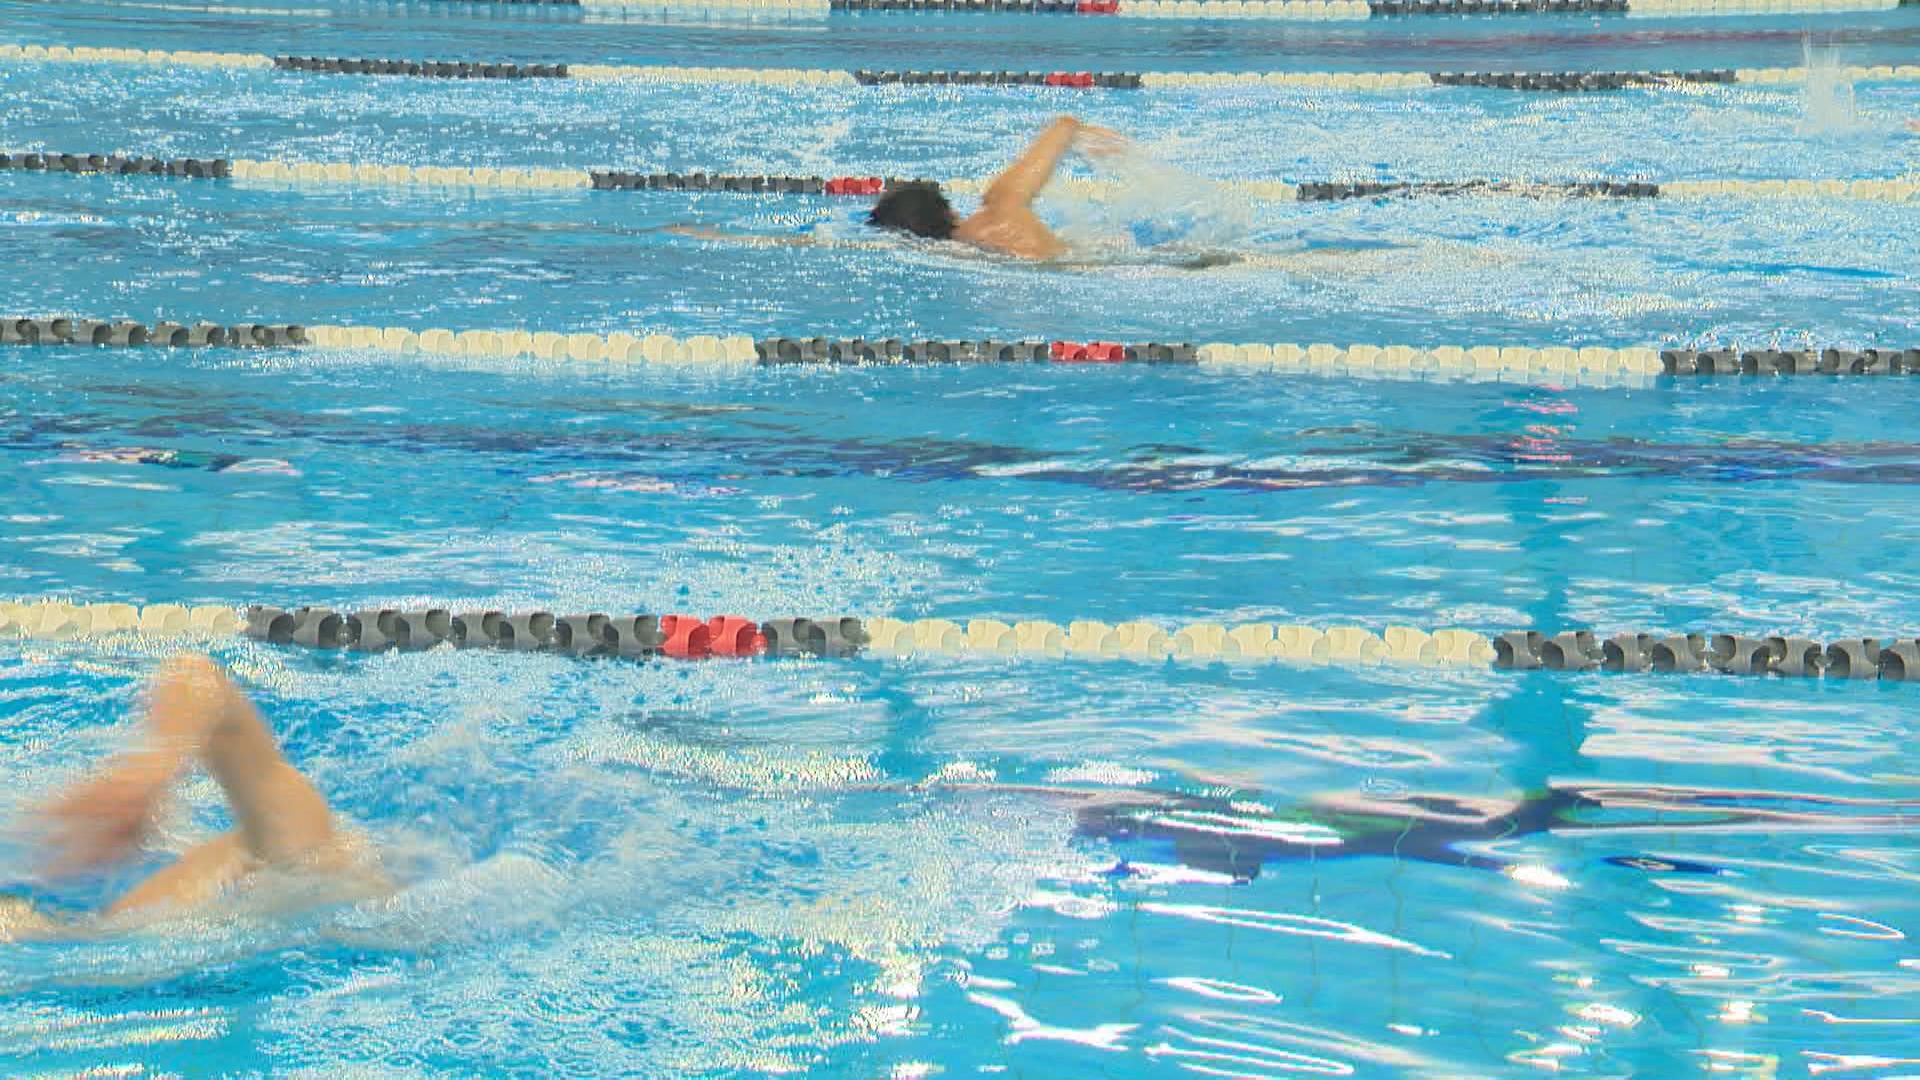 Pronghorns swim team back in the water preparing for Canadian trials